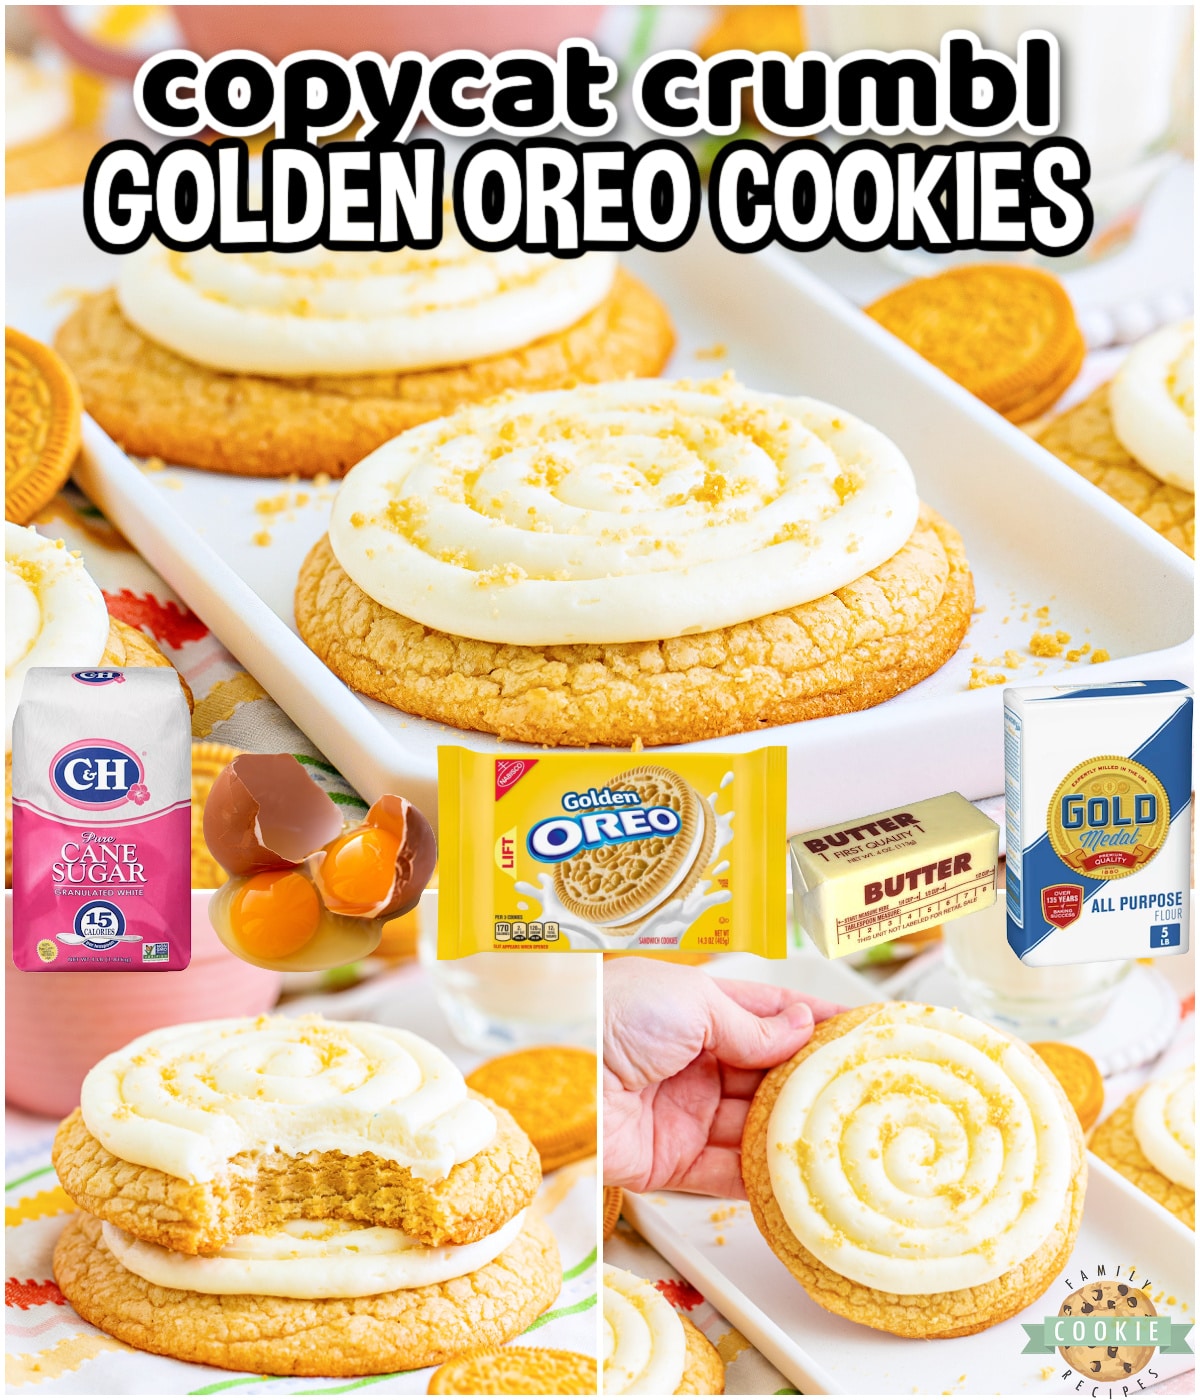 Copycat Crumbl Golden Oreo Cookies are made with Golden Oreo crumbs in the dough, a delicious cream cheese frosting, and more cookie crumbs on top. These thick and chewy vanilla cookies are incredible!